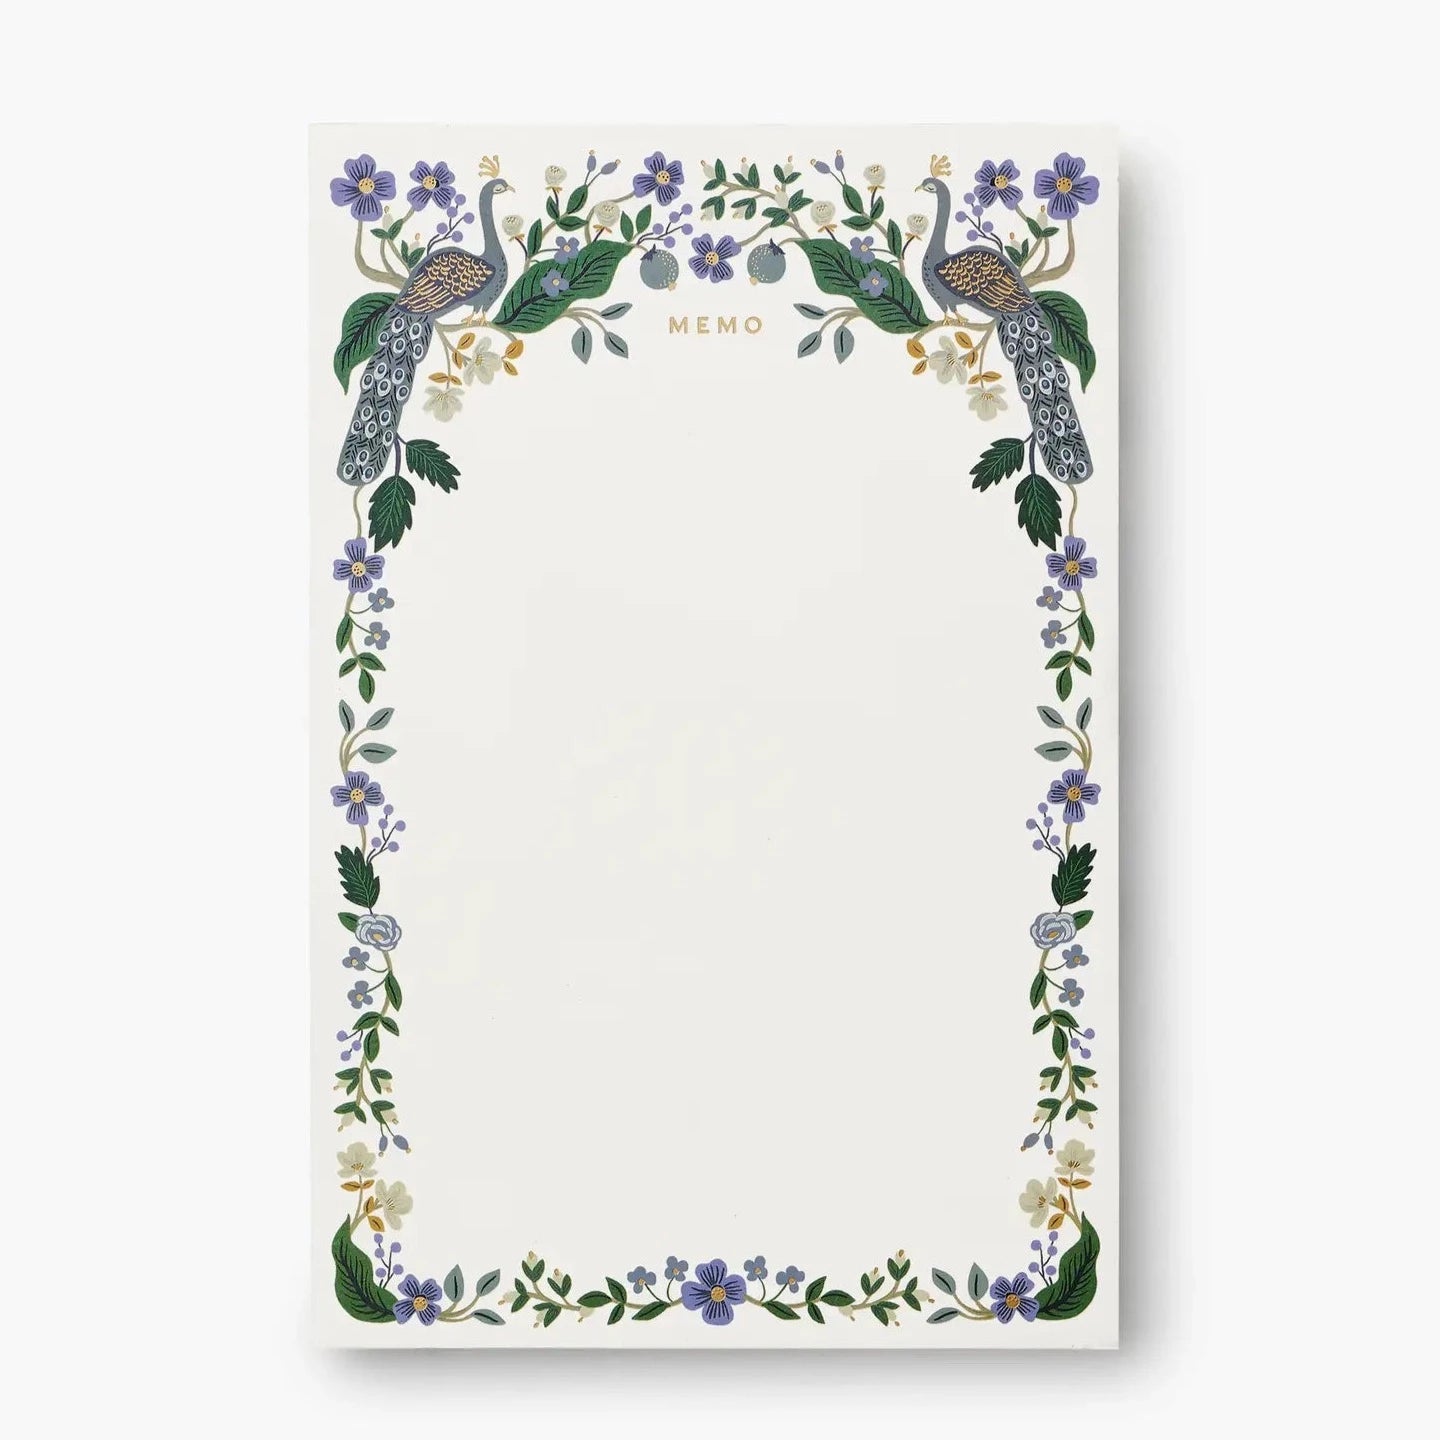 white memo pad with the word &quot;memo&quot; printed in gold foil at the top. Around the borders of the page are blue peacocks and blue flowers with greenery